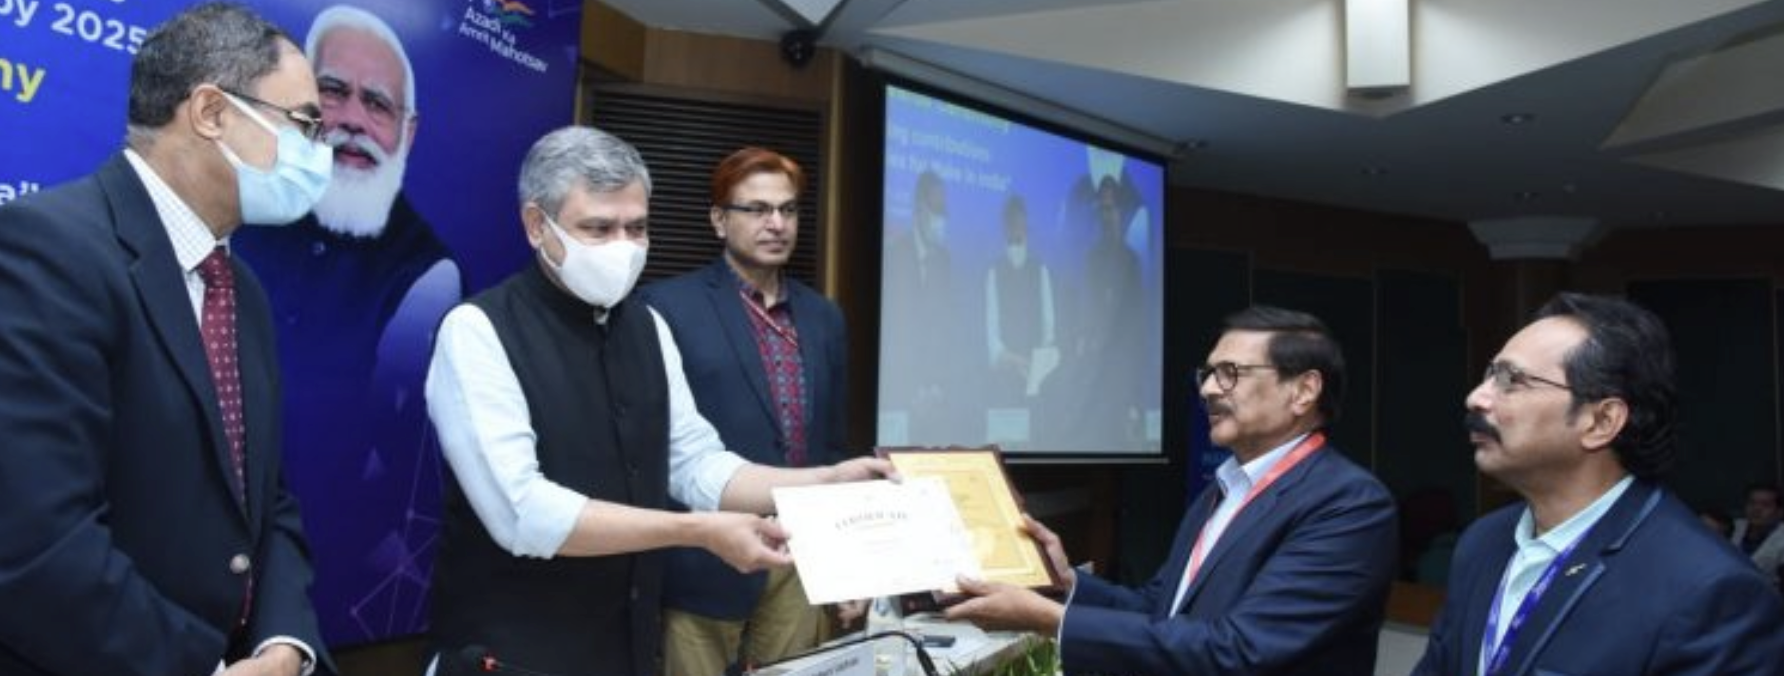 MeitY Recognizes Syrma SGS for IoT Products Manufacturing In India